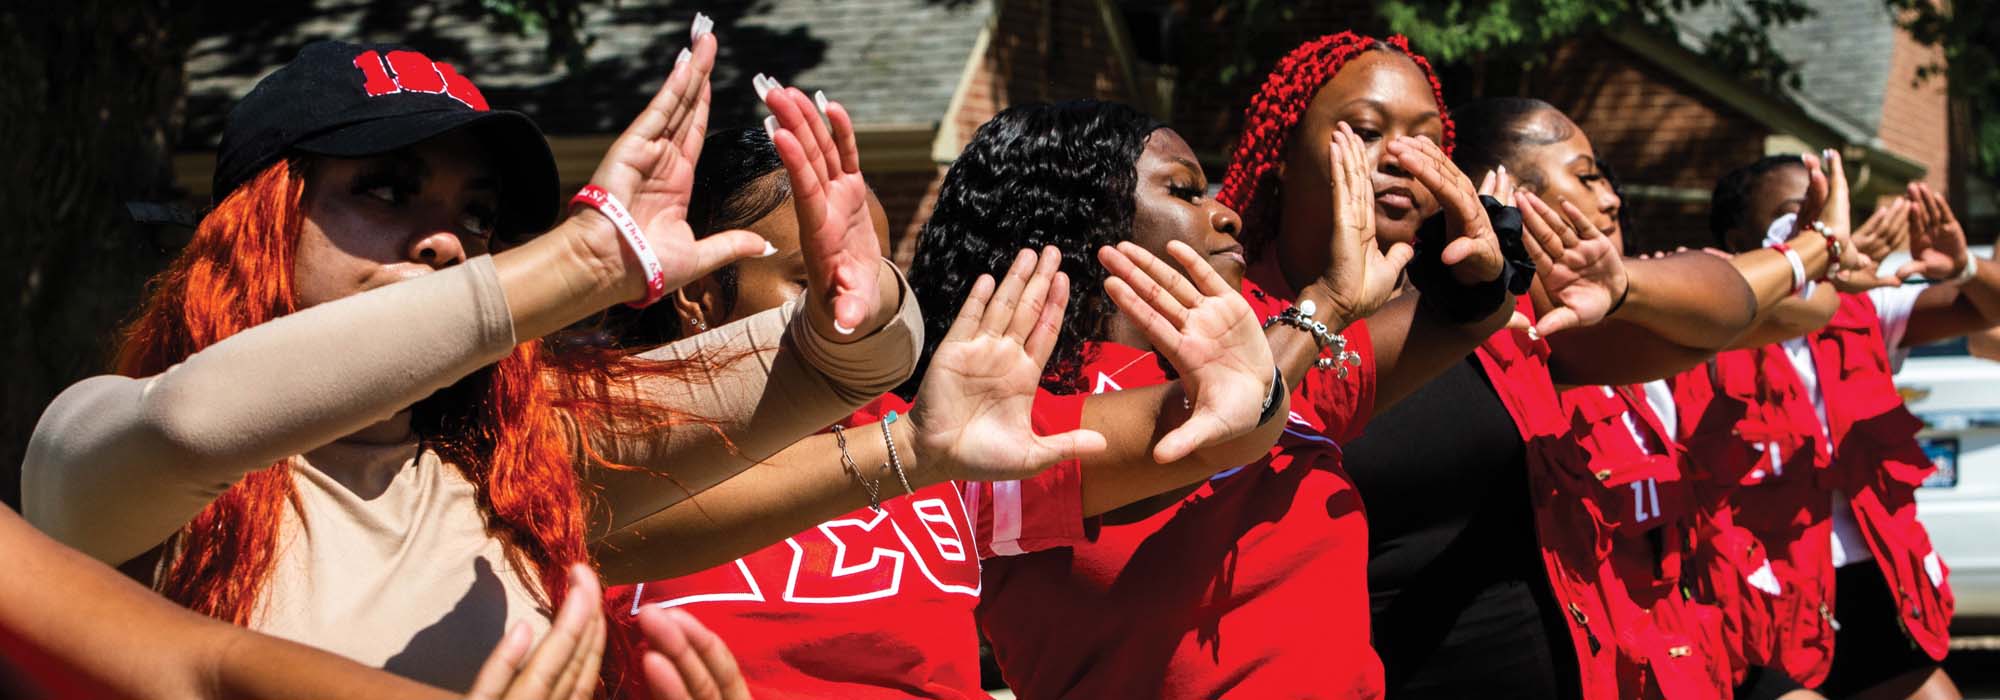 Members of Delta Sigma Theta together outside